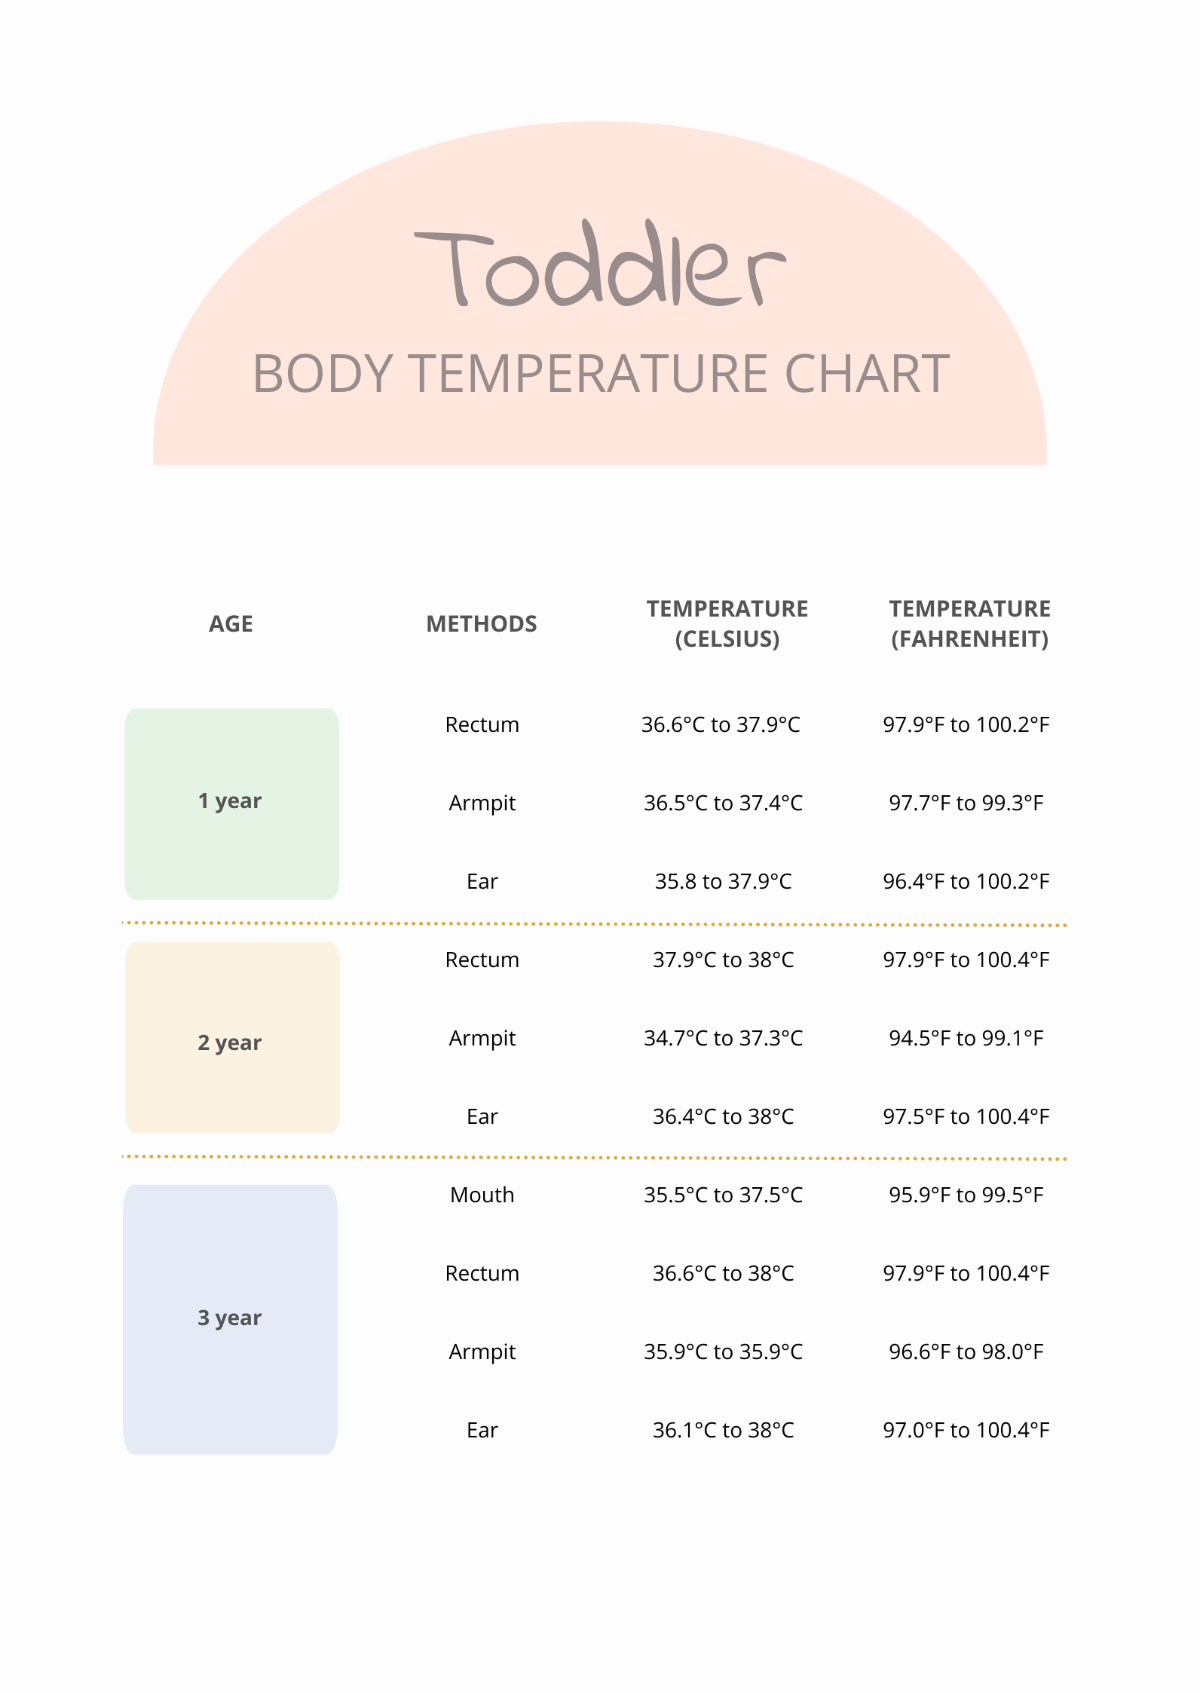 Toddler Body Temperature Chart